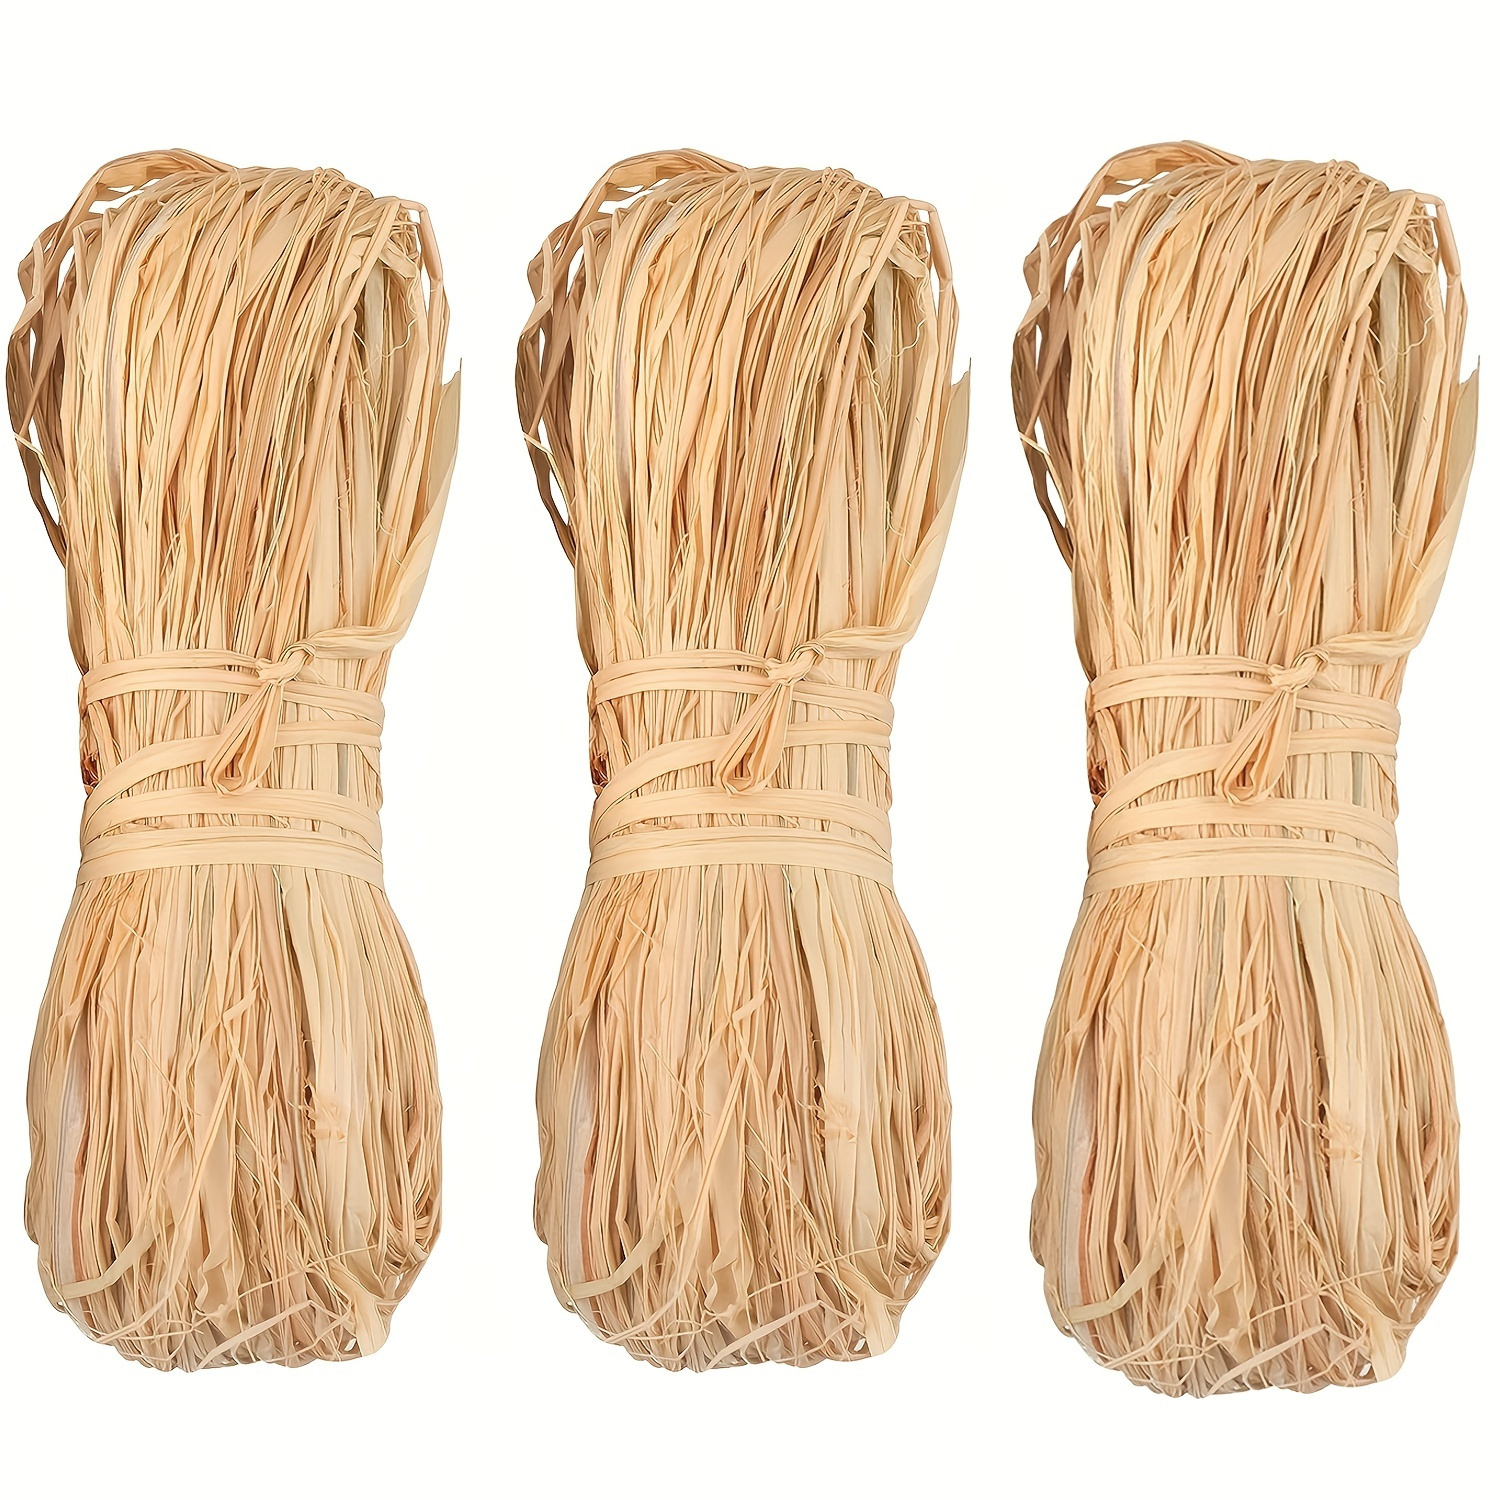 10 Metre Roll of Paper Raffia Cord Craft Twine Rope String Craft